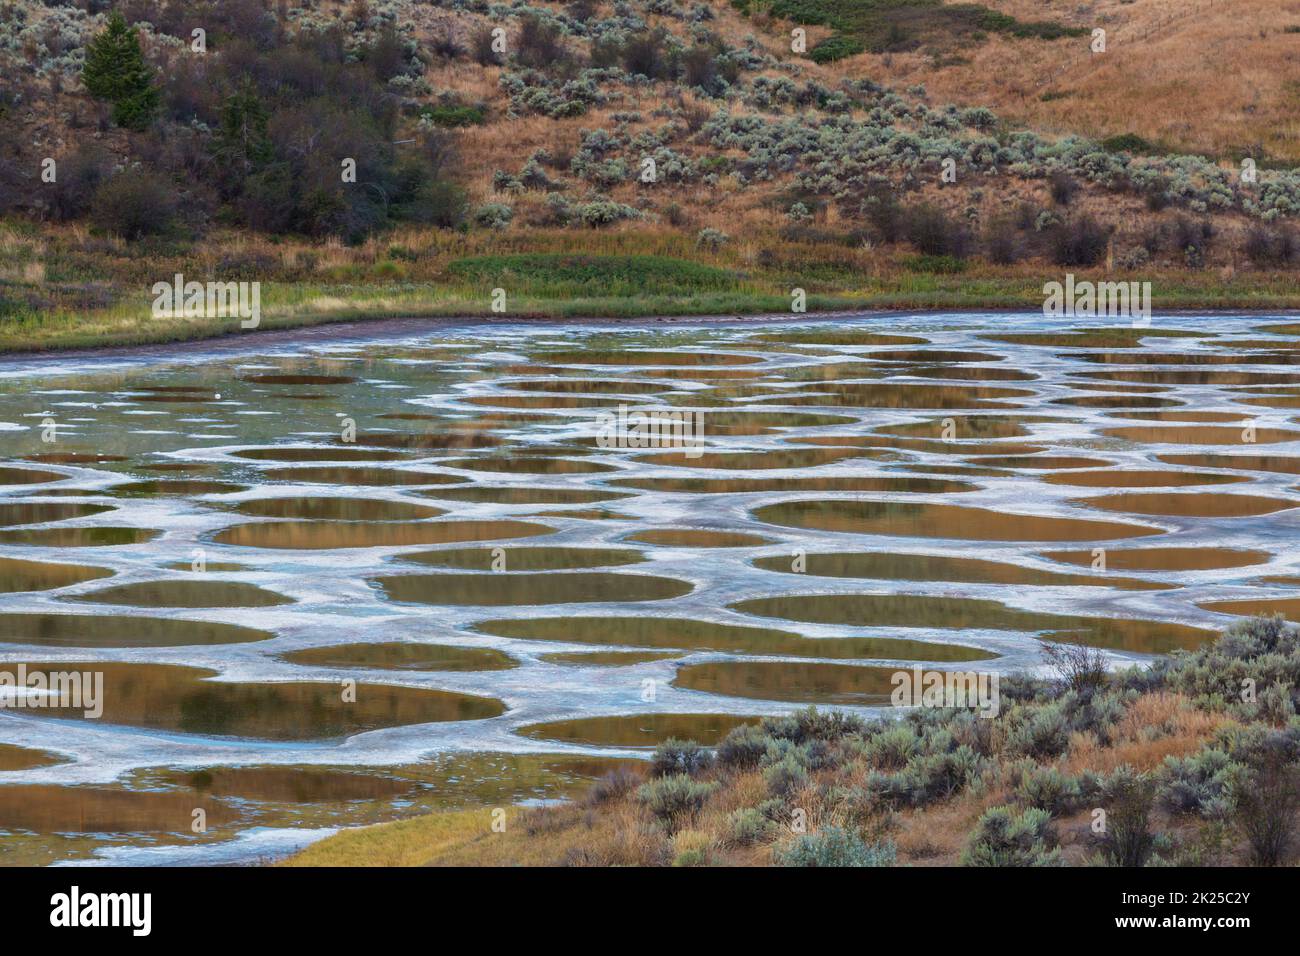 Spotted Lake in British Columbia, Canada Stock Photo